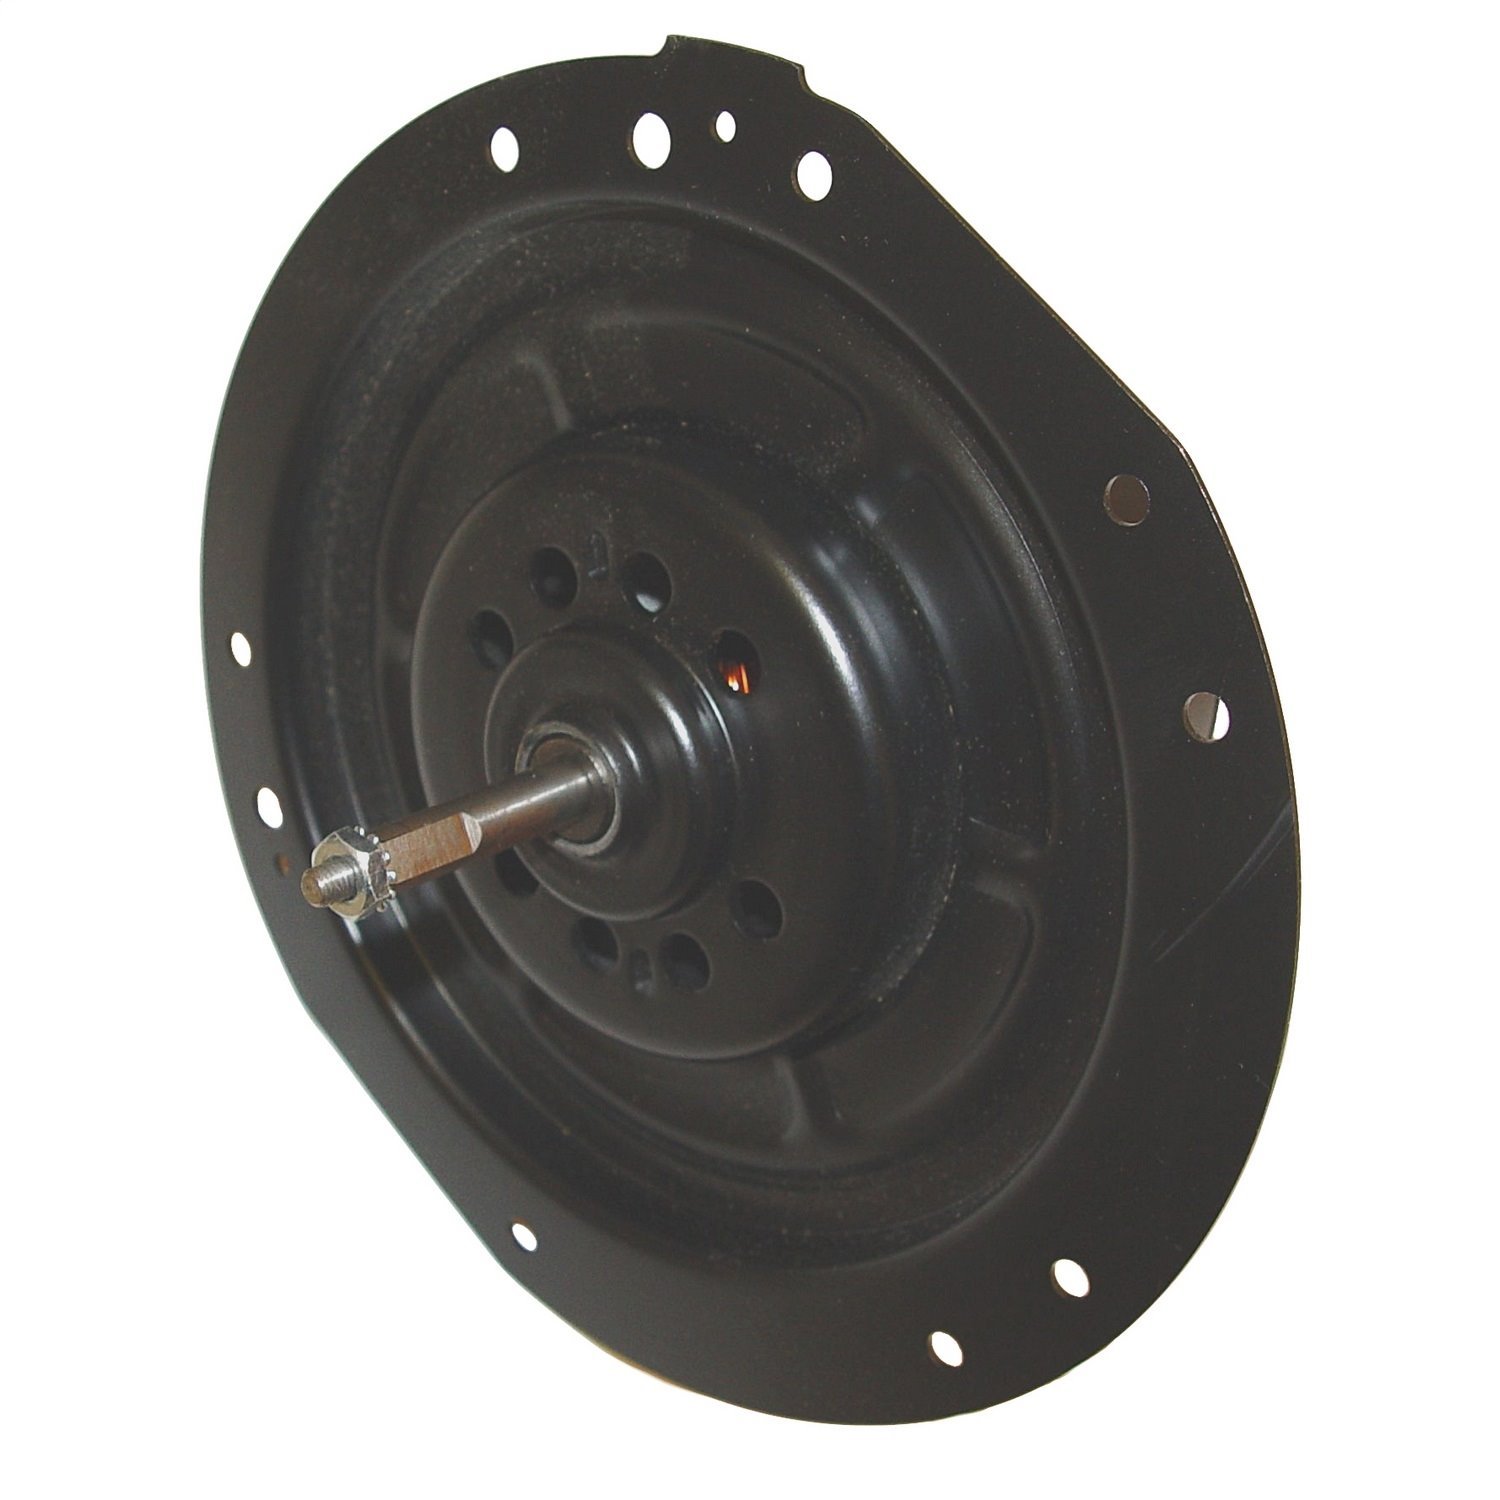 This heater blower motor from Omix-ADA fits 91-95 Jeep Wrangler YJ